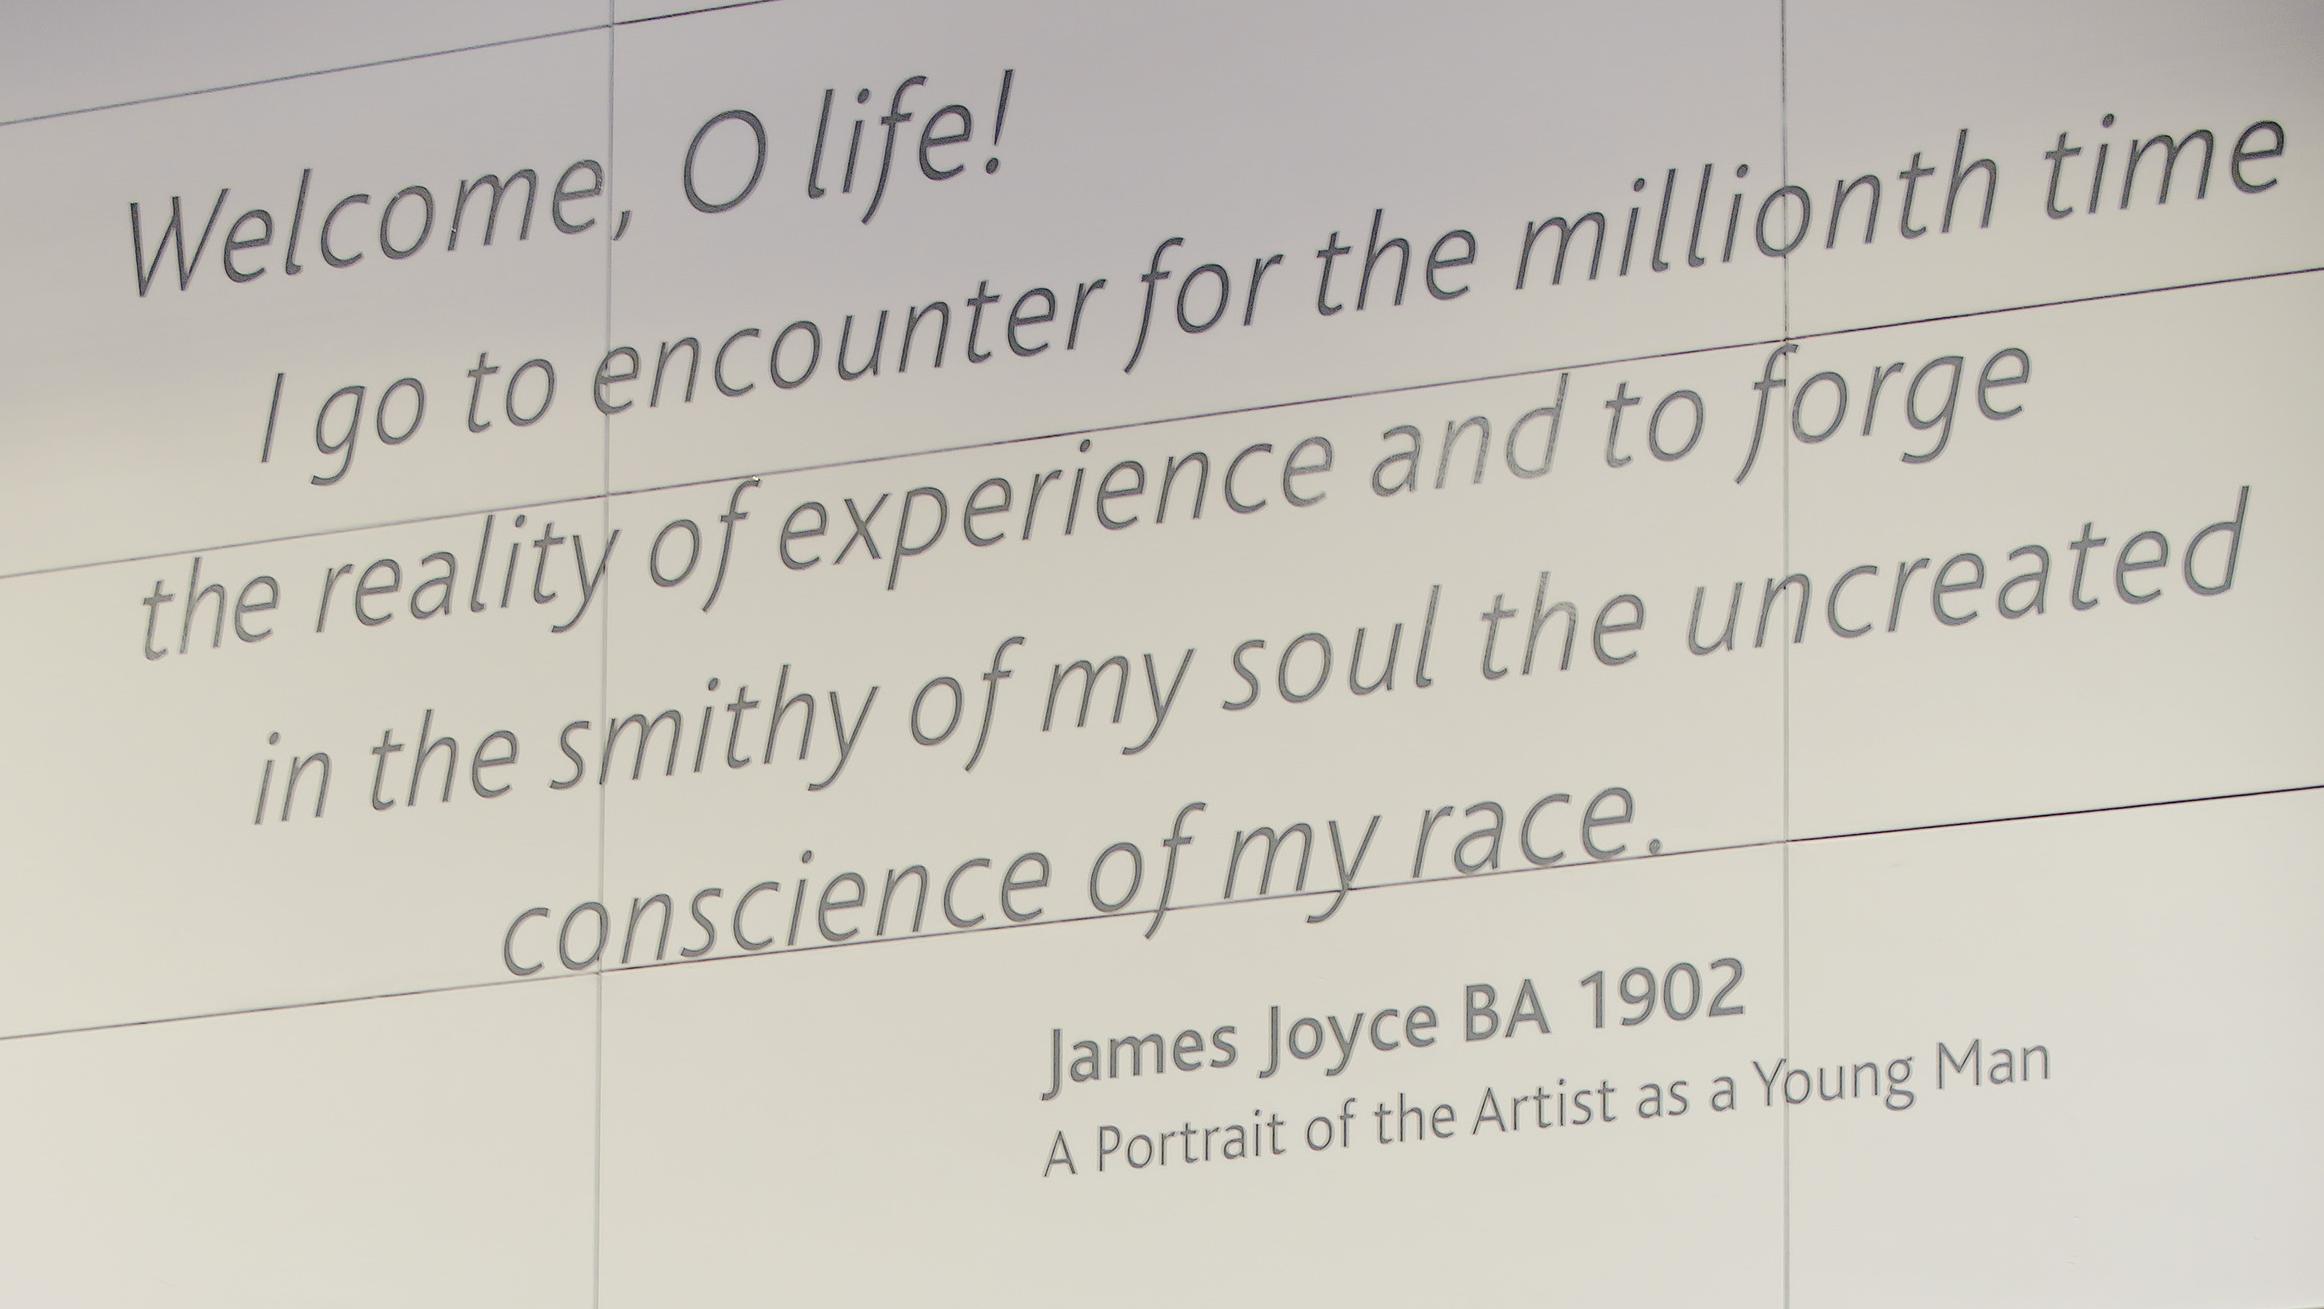 Image of James Joyce Quote that says Welcome, O life! I go to encounter for the millionth time the reality of experience and to forge in the smithy of my soul the uncreated conscience of my race.